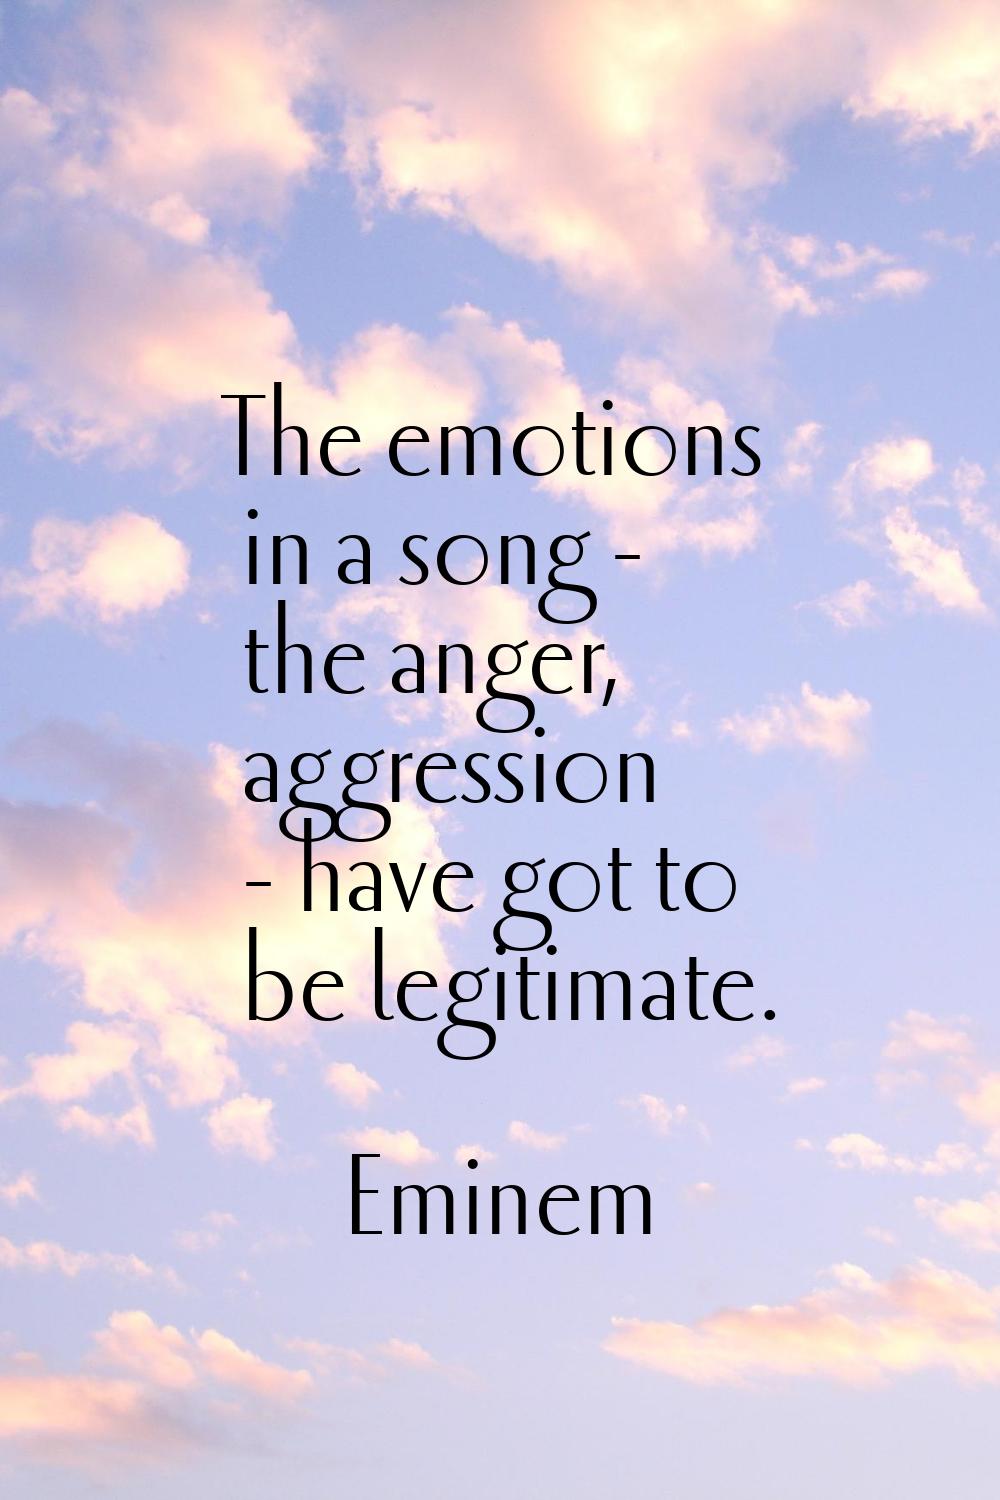 The emotions in a song - the anger, aggression - have got to be legitimate.